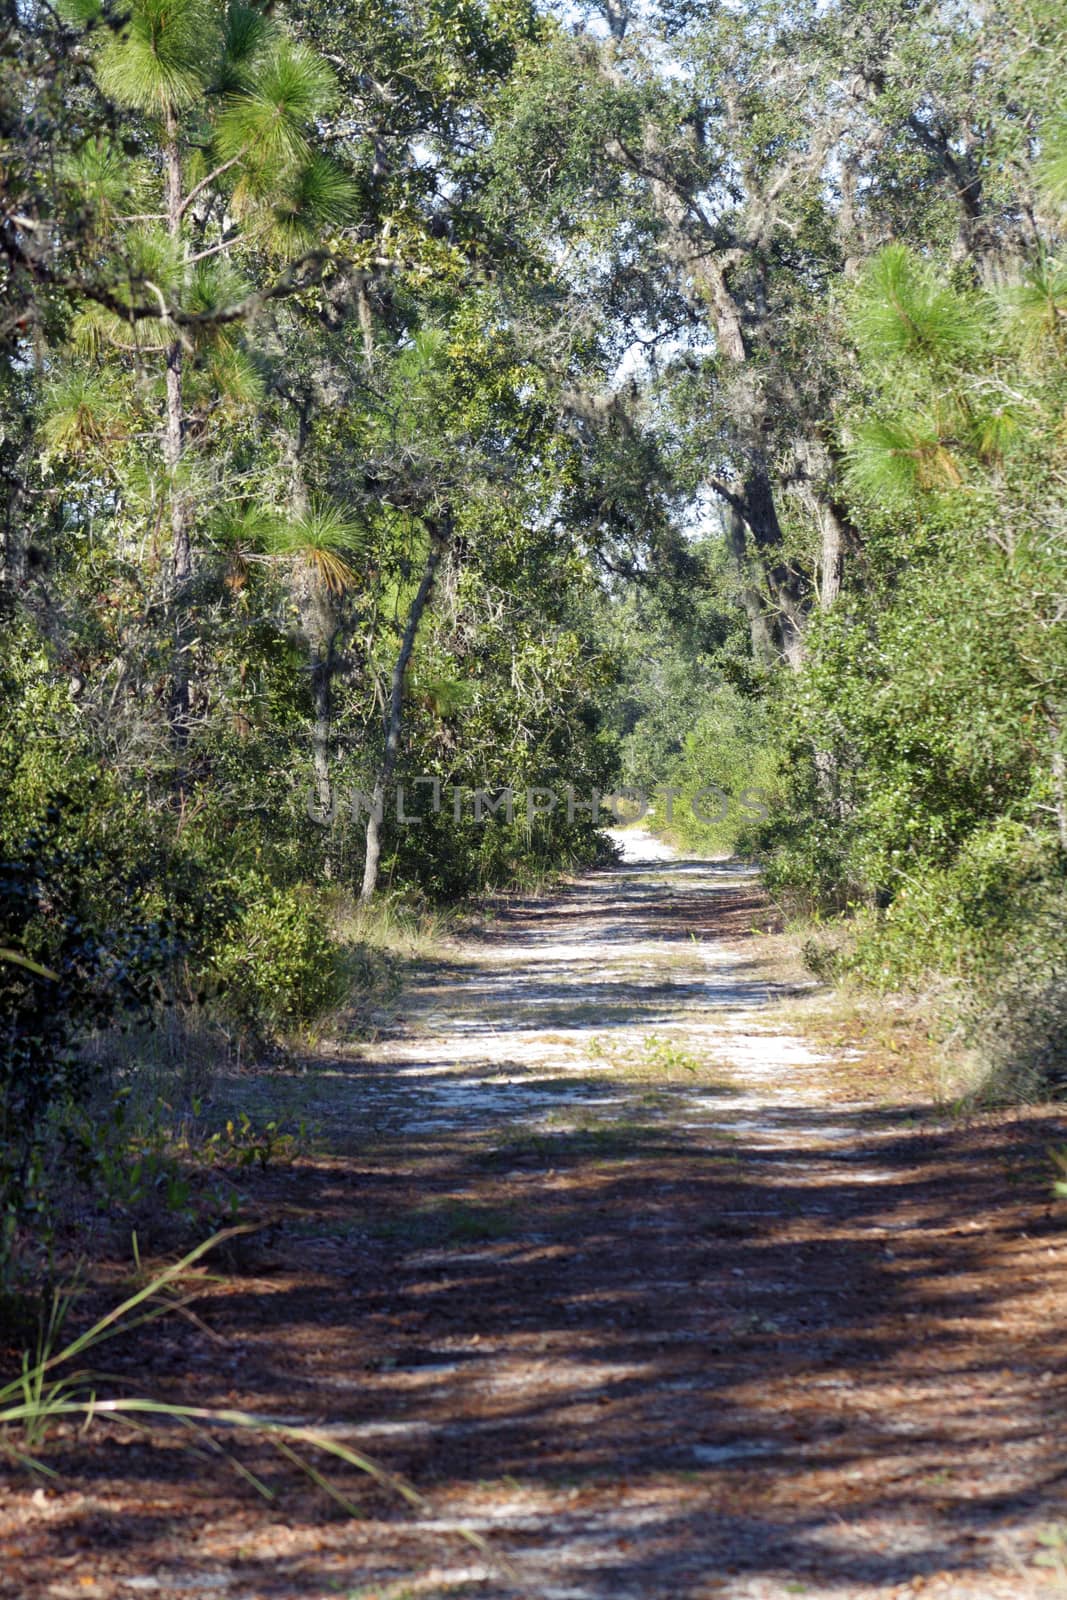 A sandy trail winds it way through a southern pine forest.